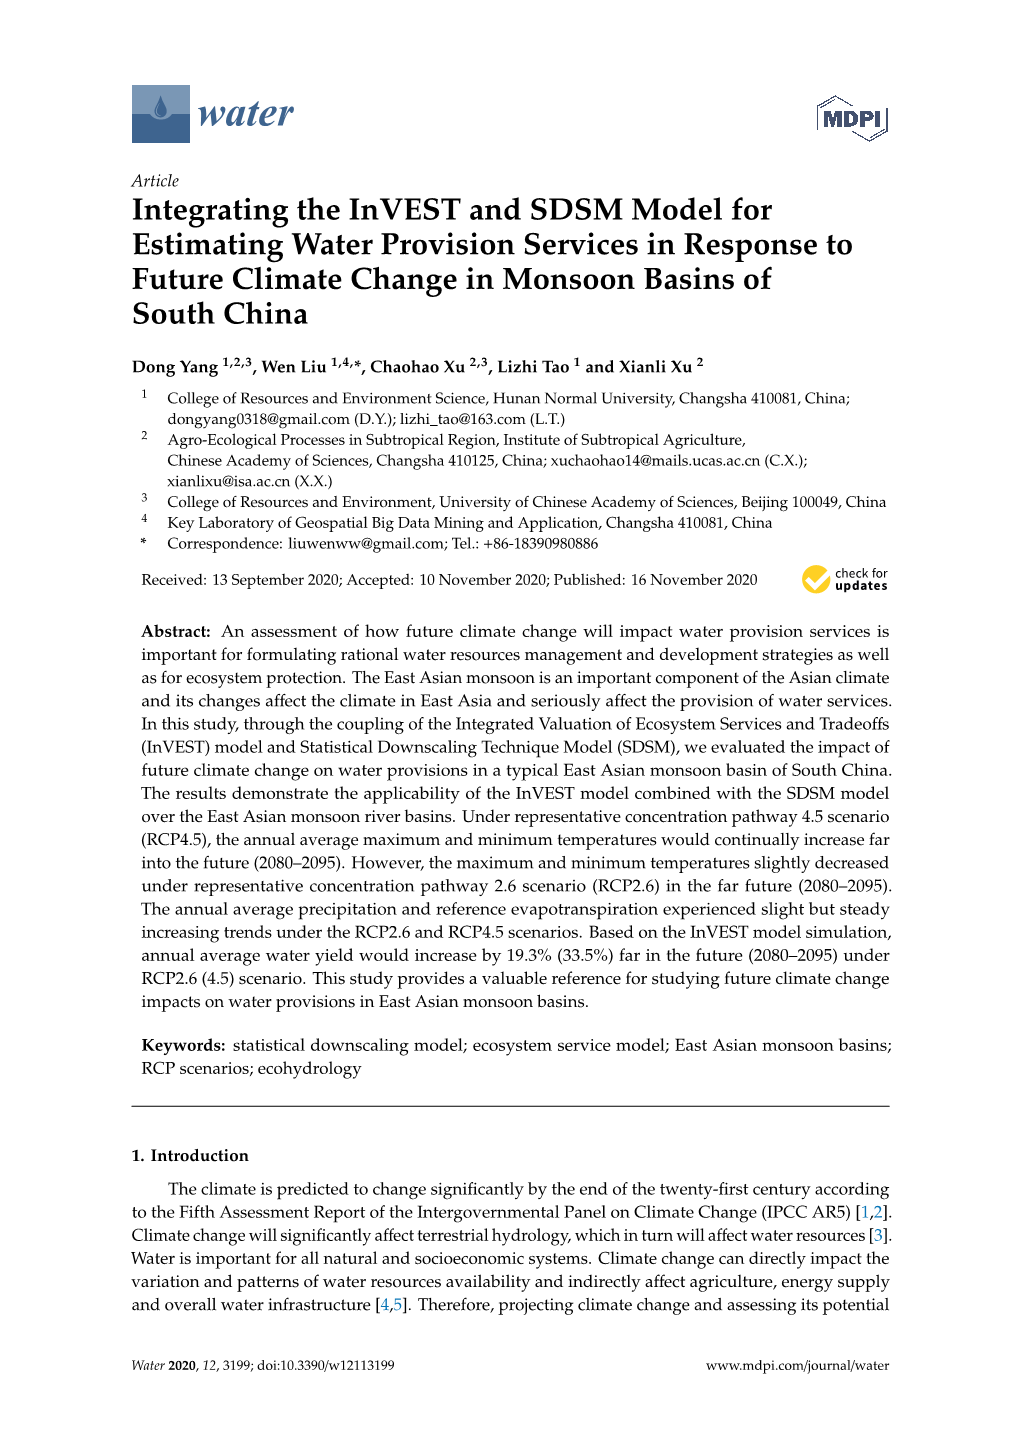 Integrating the Invest and SDSM Model for Estimating Water Provision Services in Response to Future Climate Change in Monsoon Basins of South China